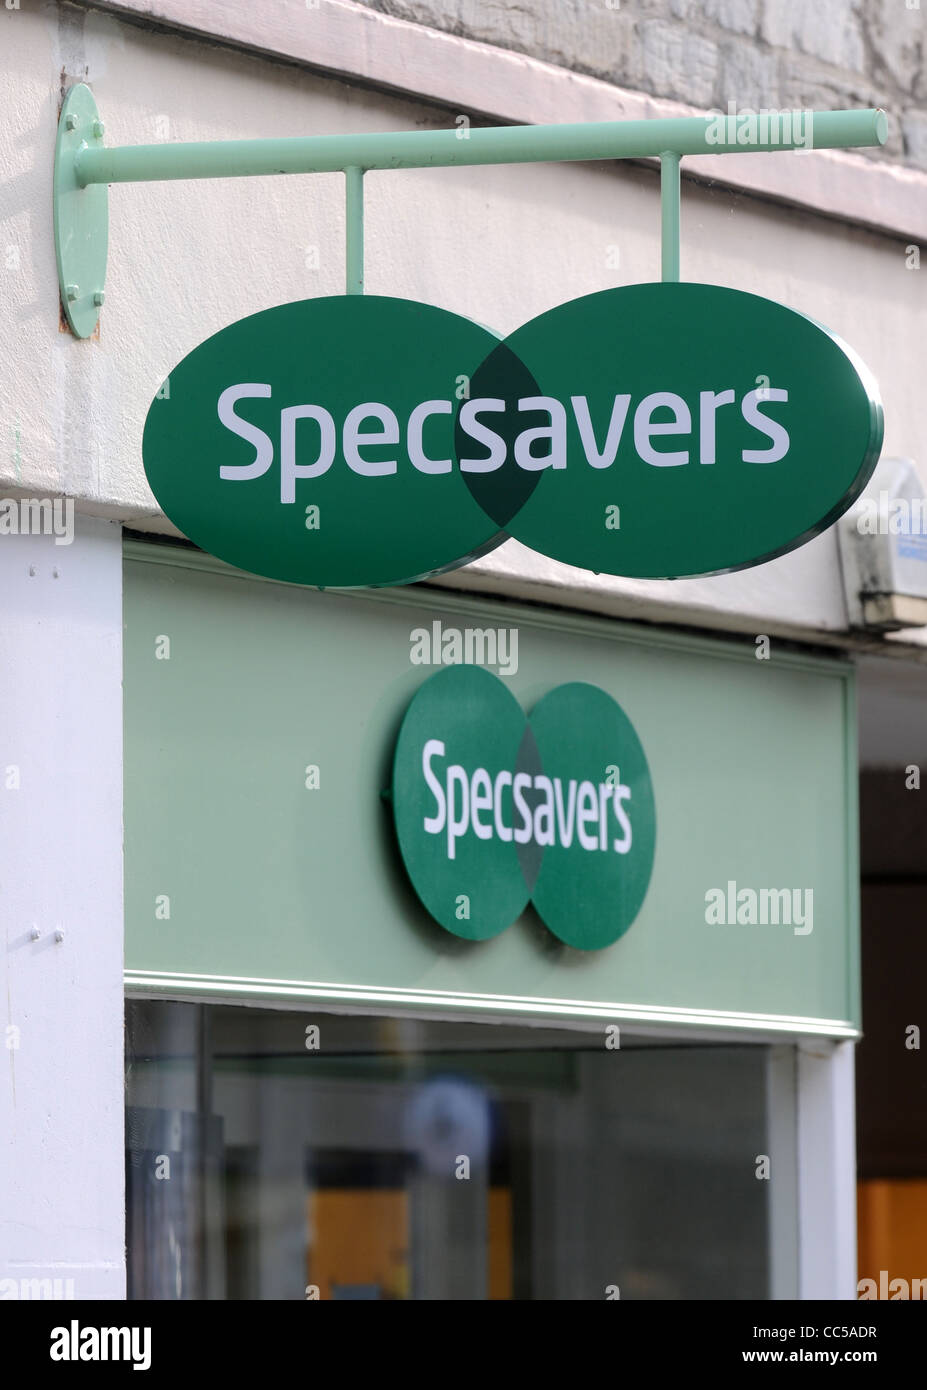 Opticiens Specsavers sign Banque D'Images